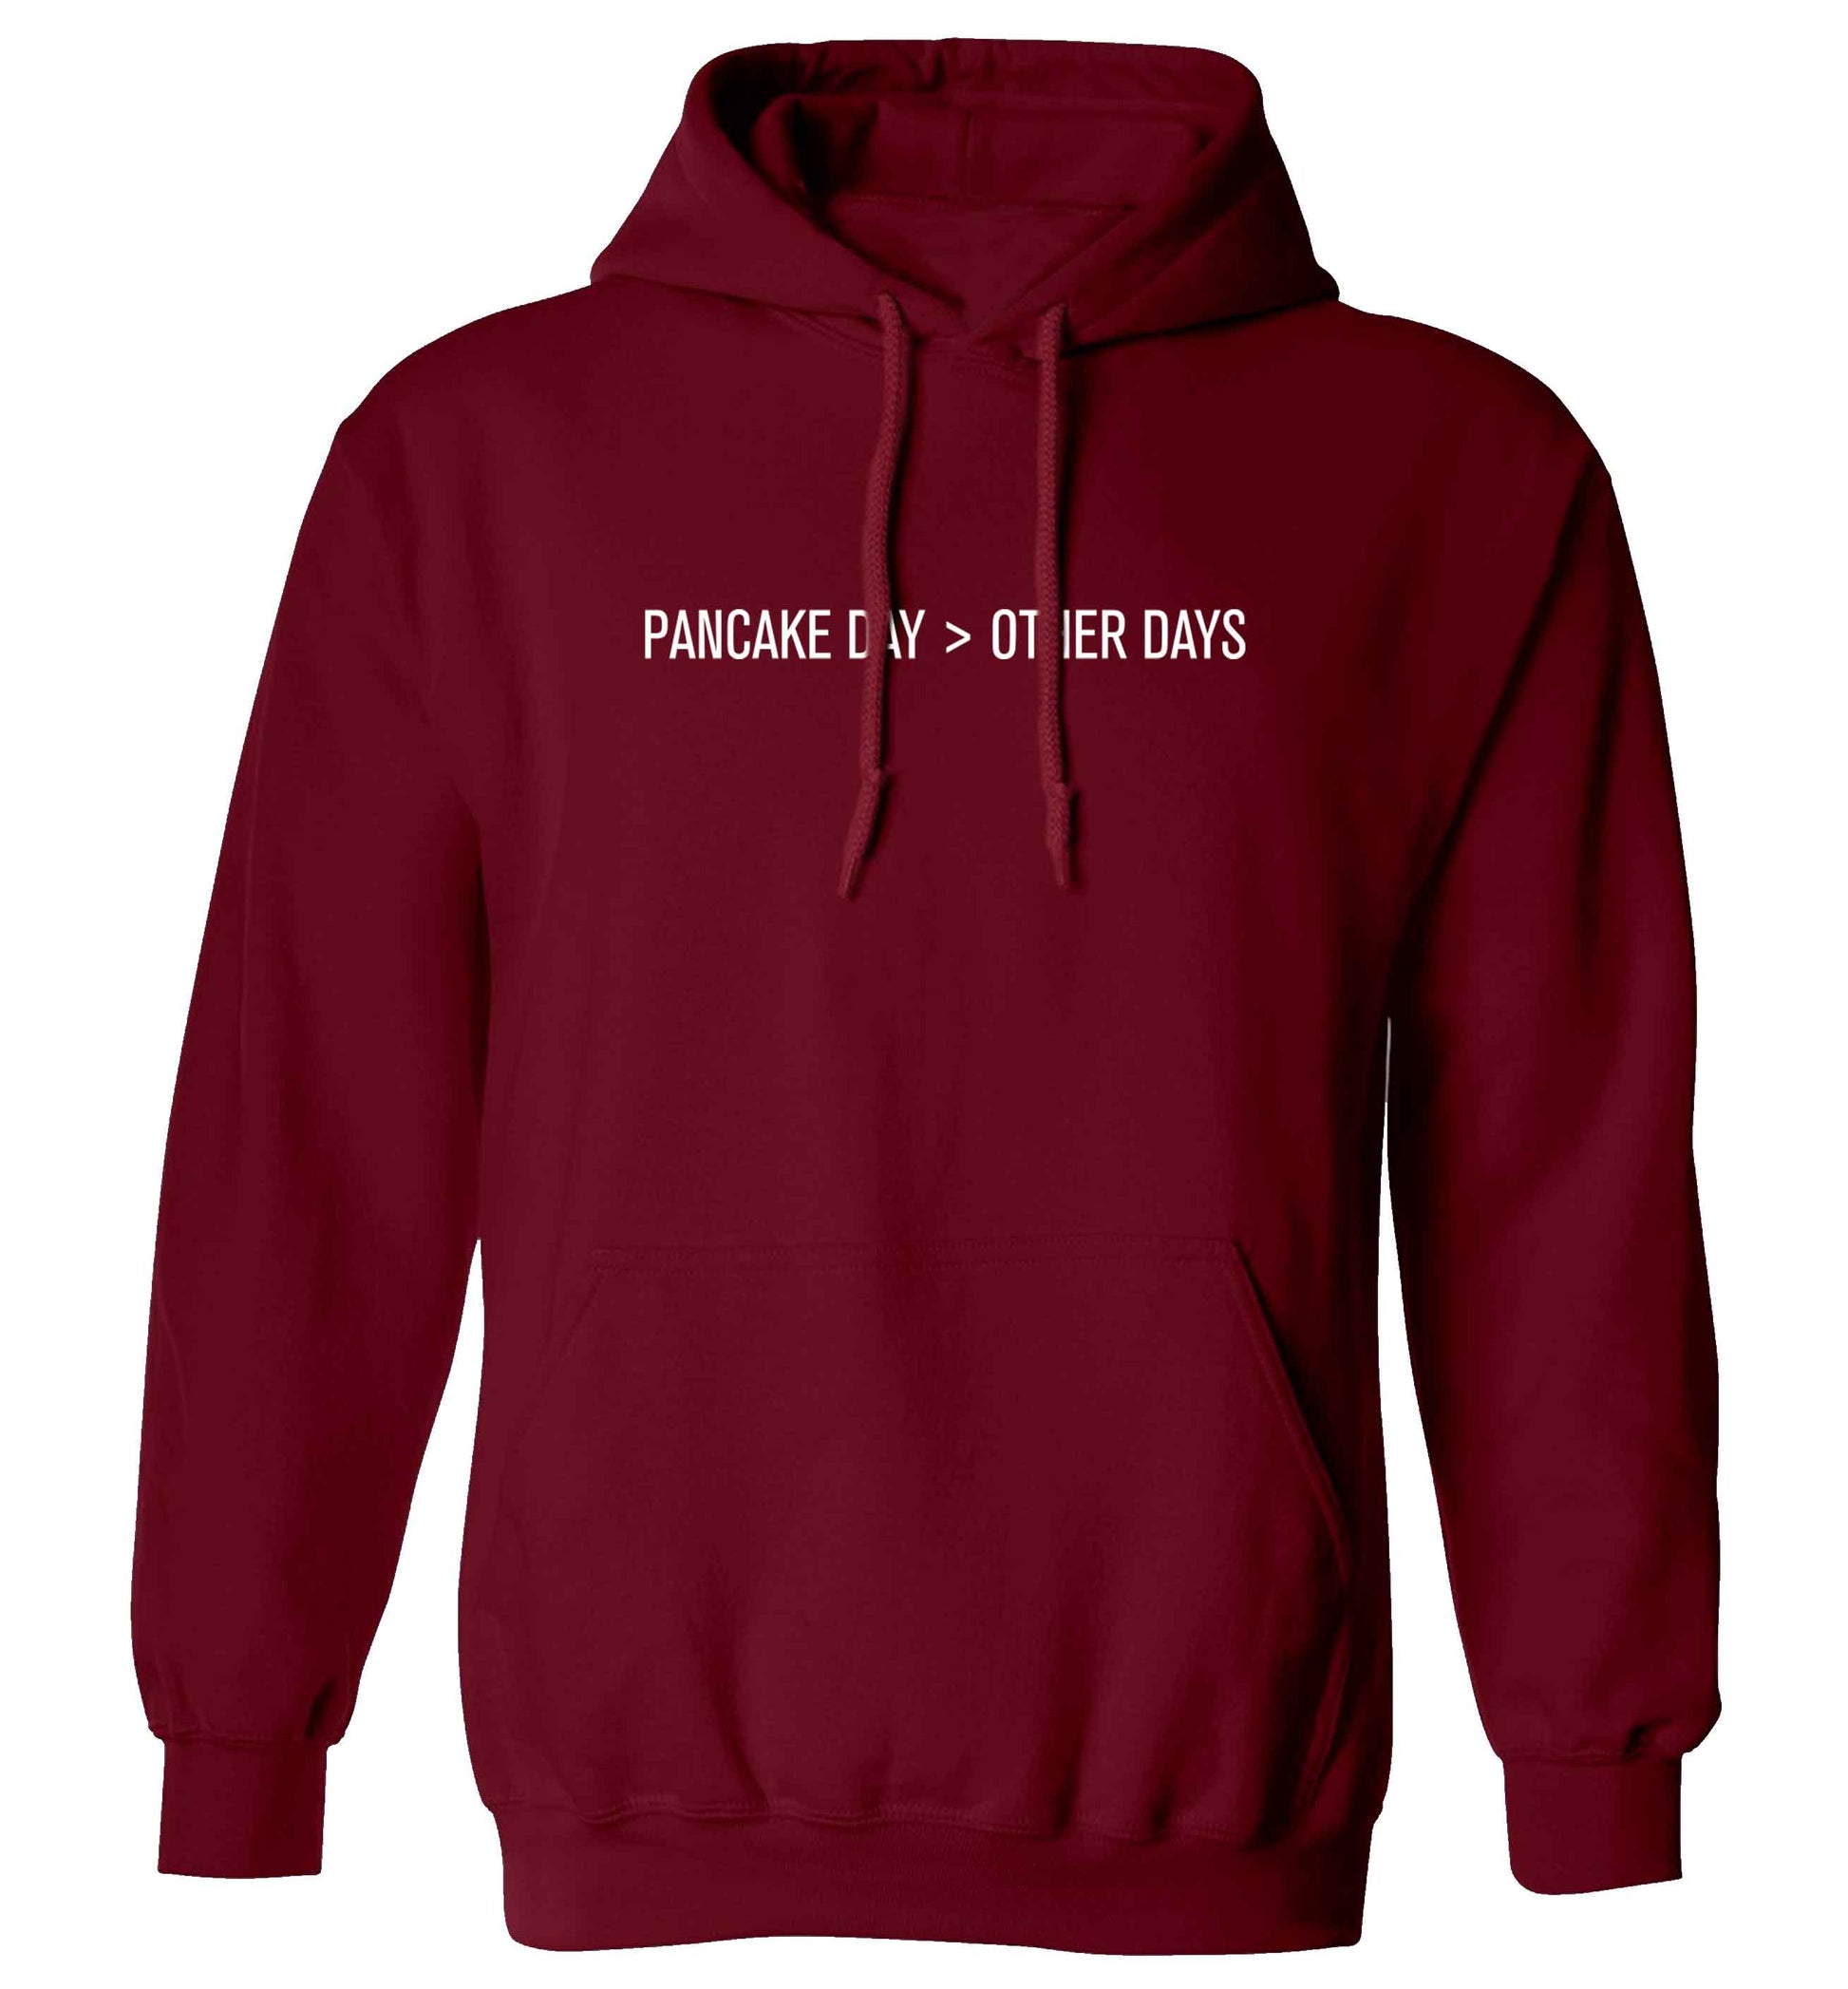 Pancake day > other days adults unisex maroon hoodie 2XL